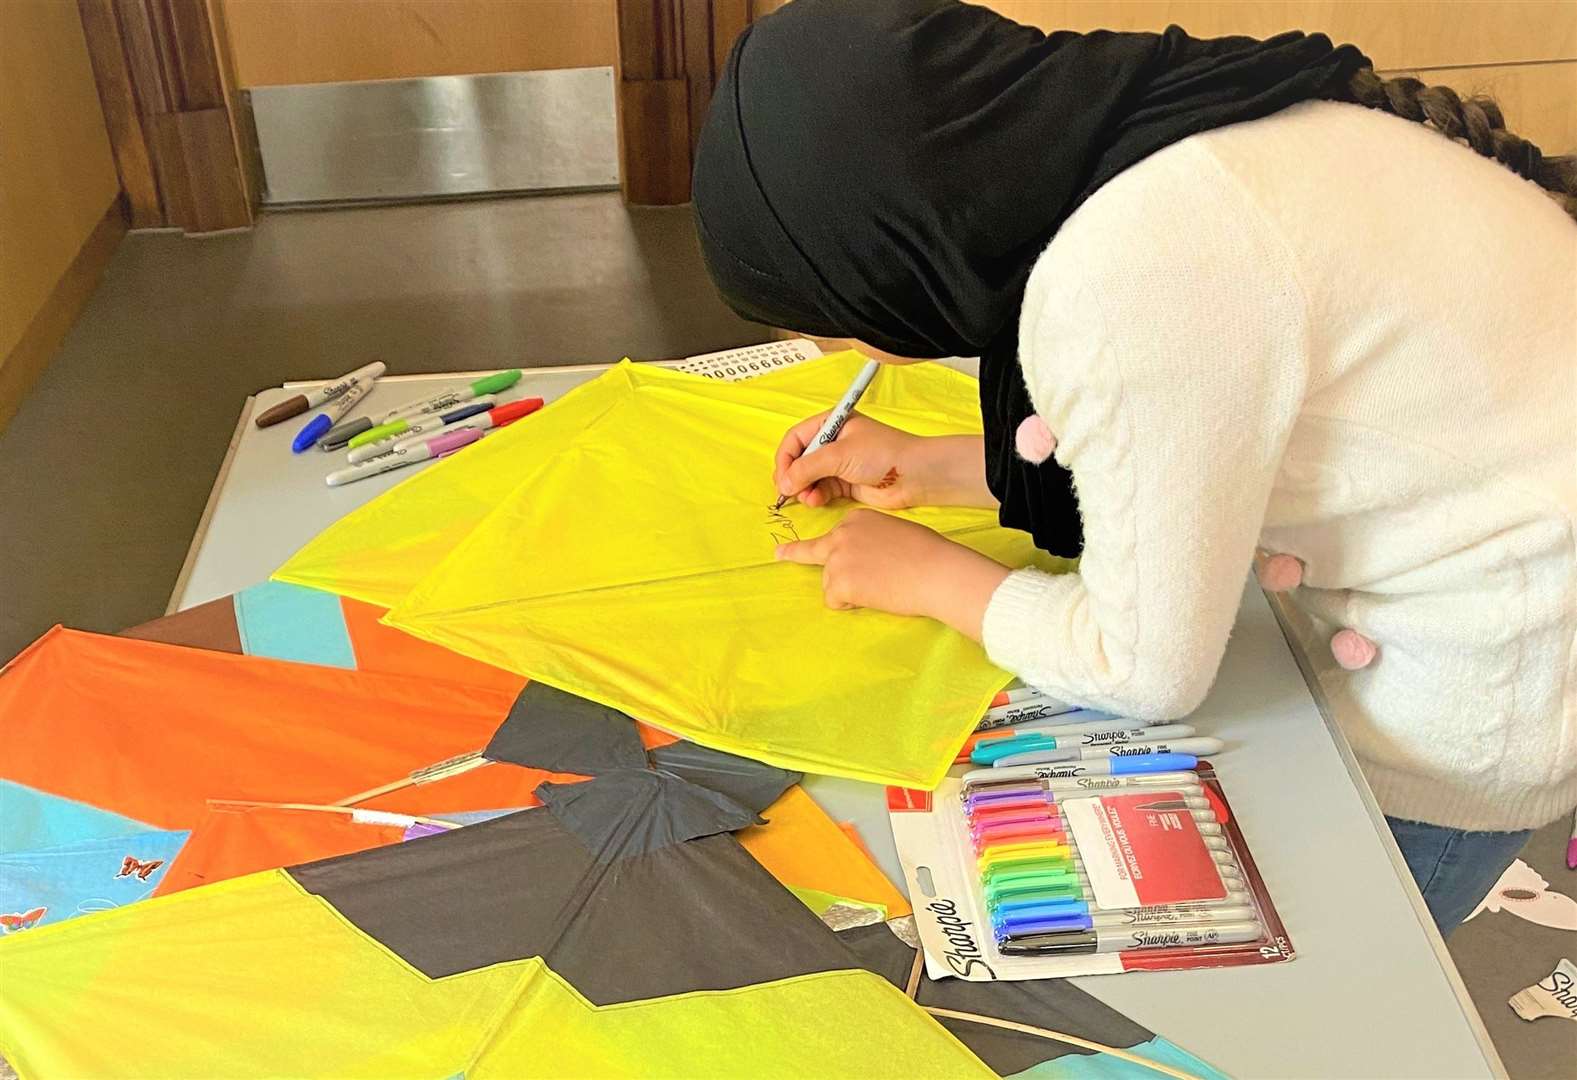 Kite-making allowed Afghan to share their traditions as well as giving them a chance to practice their English language skills.